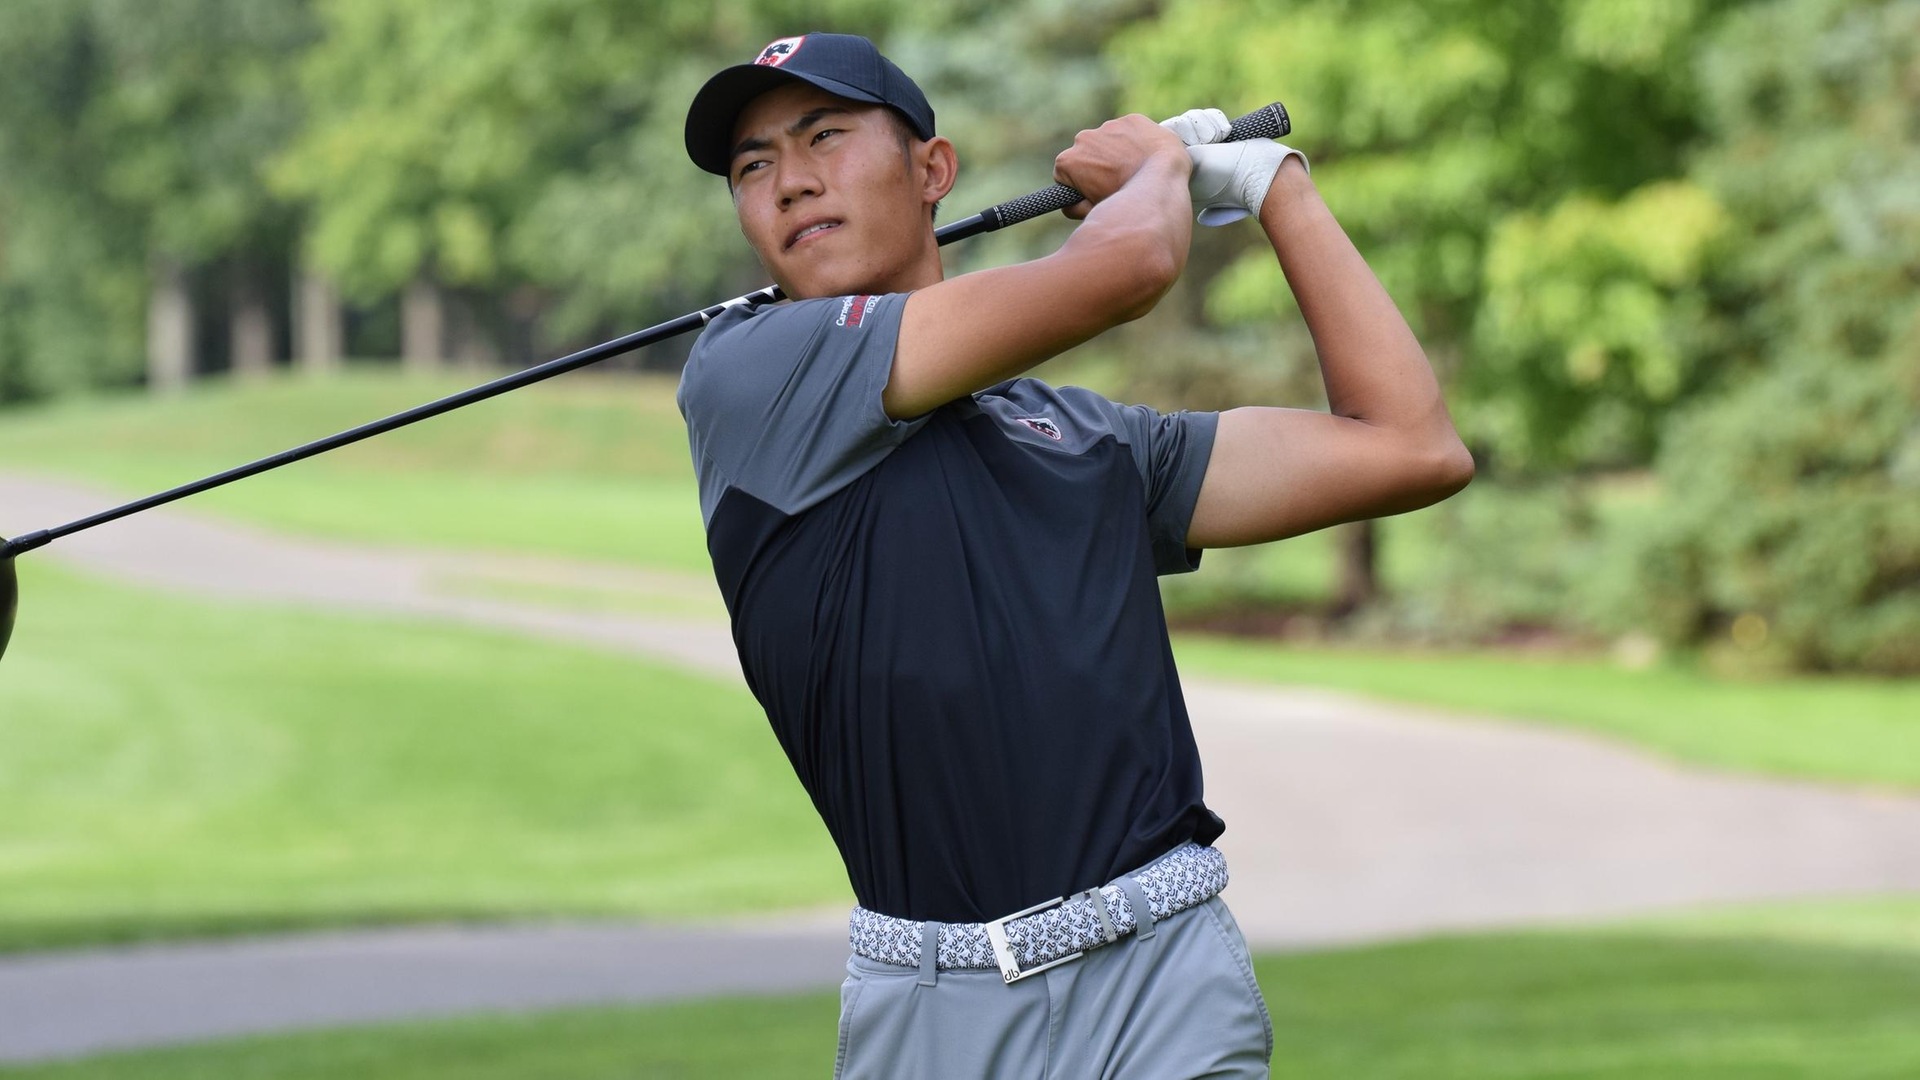 Zhang Named UAA Men’s Golf Rookie of the Year; Scavone and Xu Named to All-UAA Squad